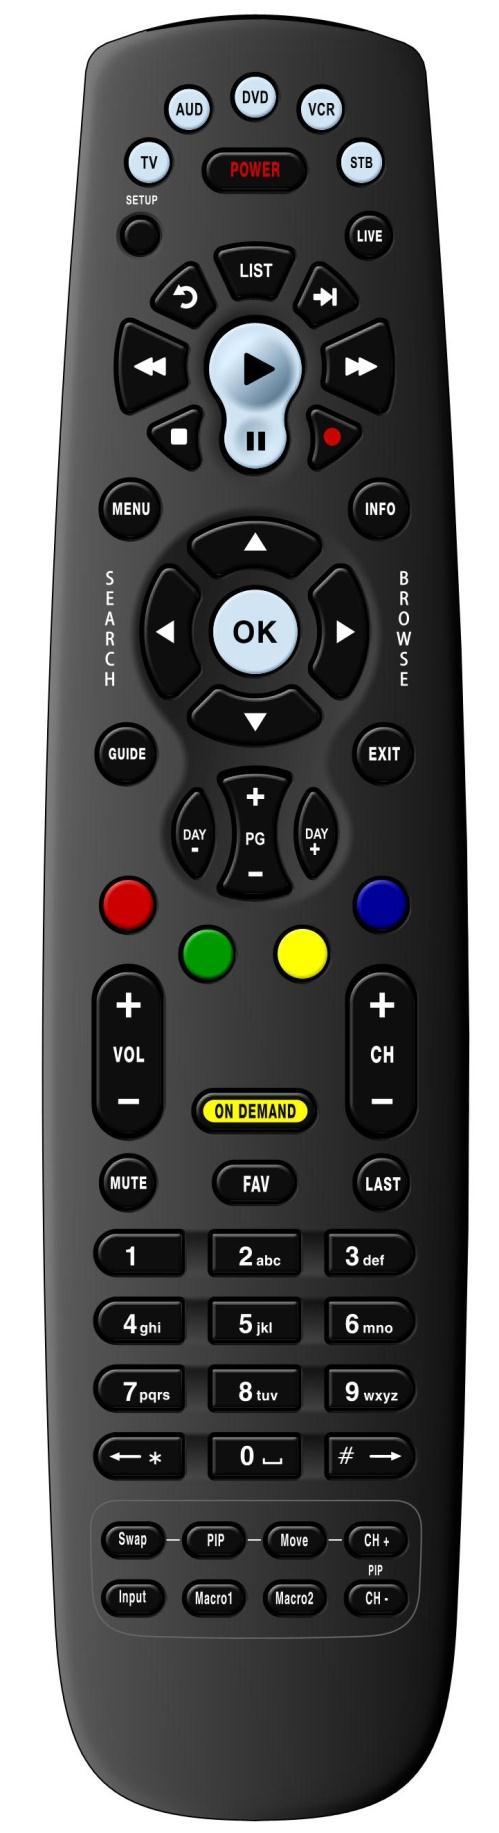 IPTV Middleware Remote Control & DVR User Guide Version 5.0 The information presented in this document is written for the default settings of the system.